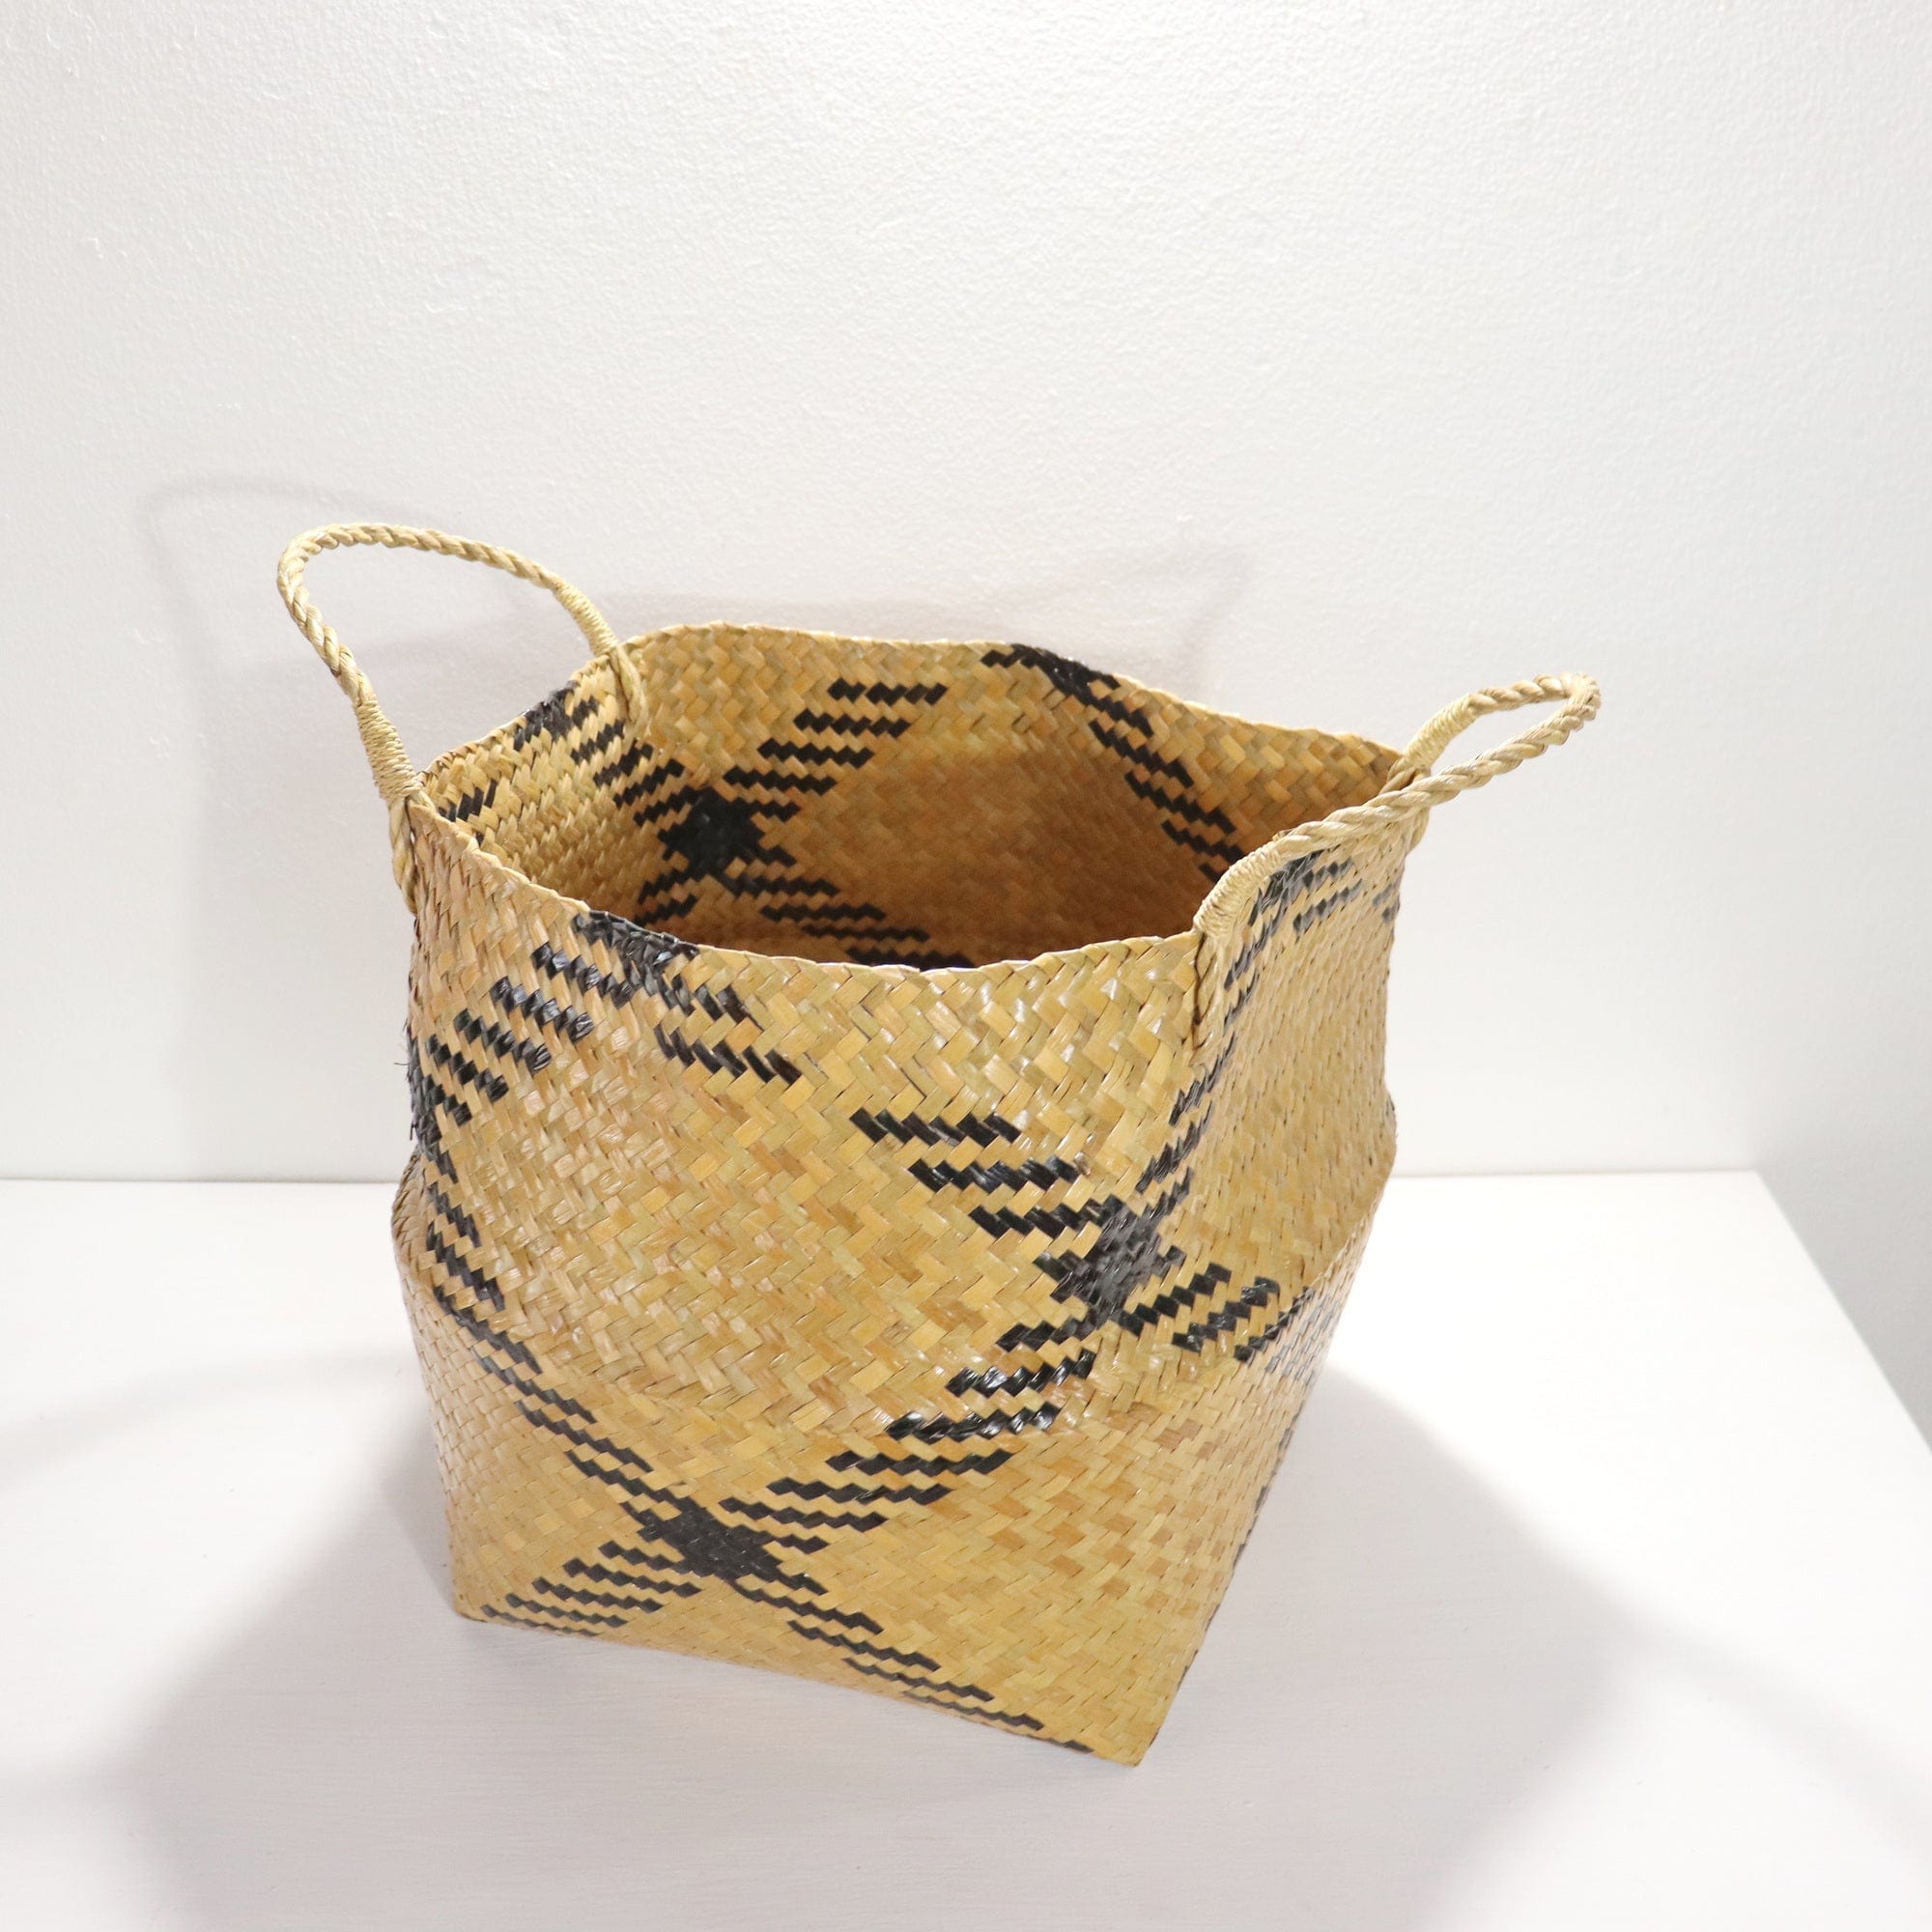 WI LAI - Wicker Basket 14 inches